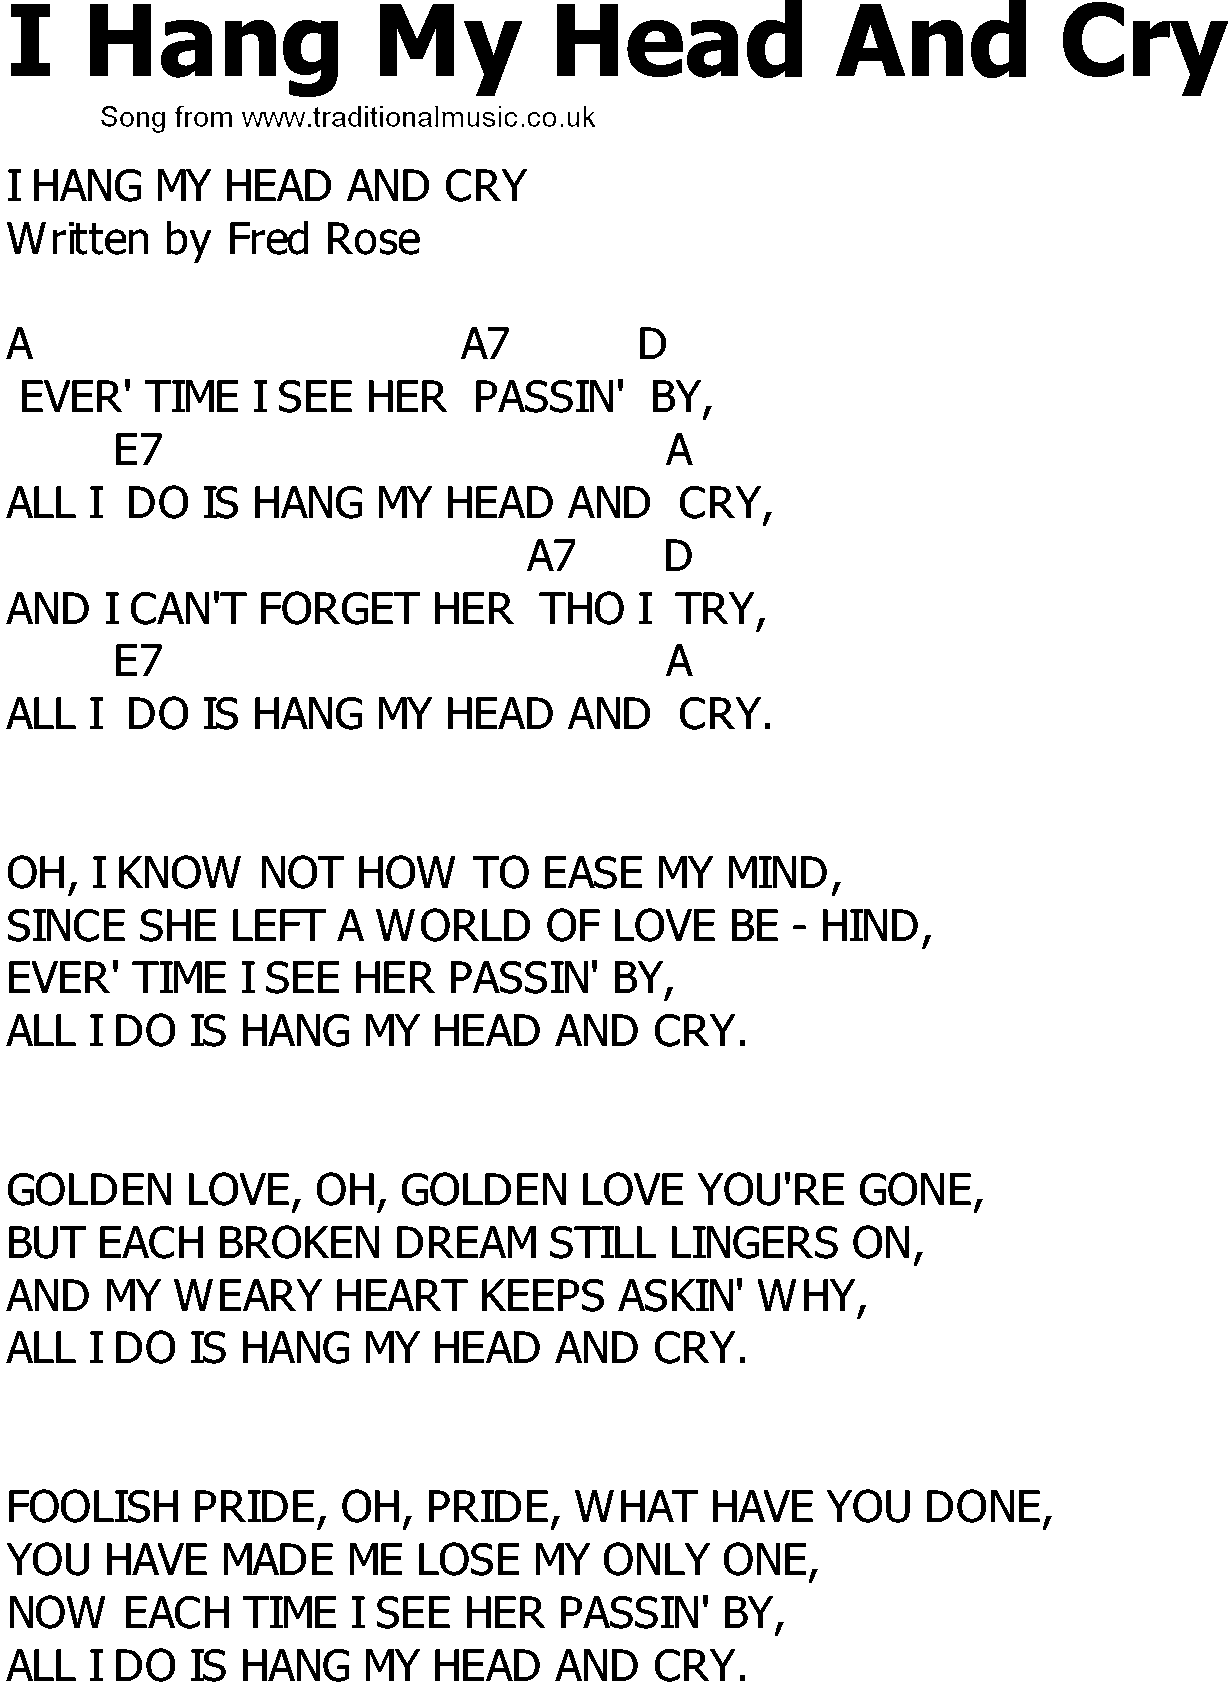 Old Country song lyrics with chords - I Hang My Head And Cry